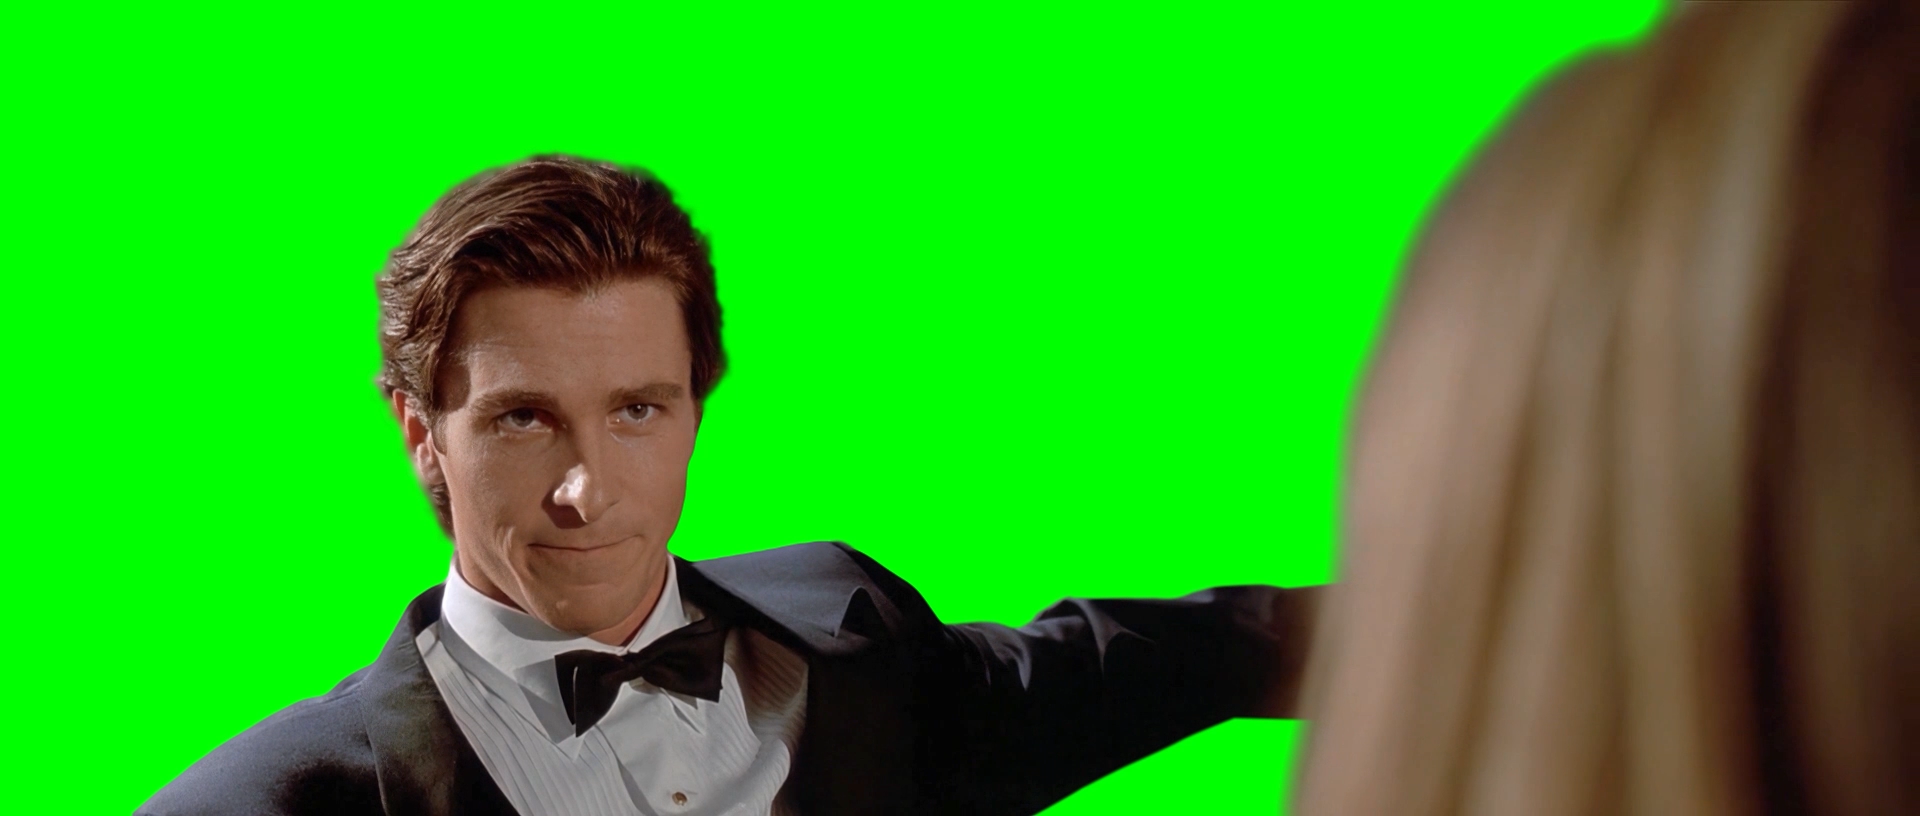 Well actually, that's none of your business - American Psycho meme (Green Screen)